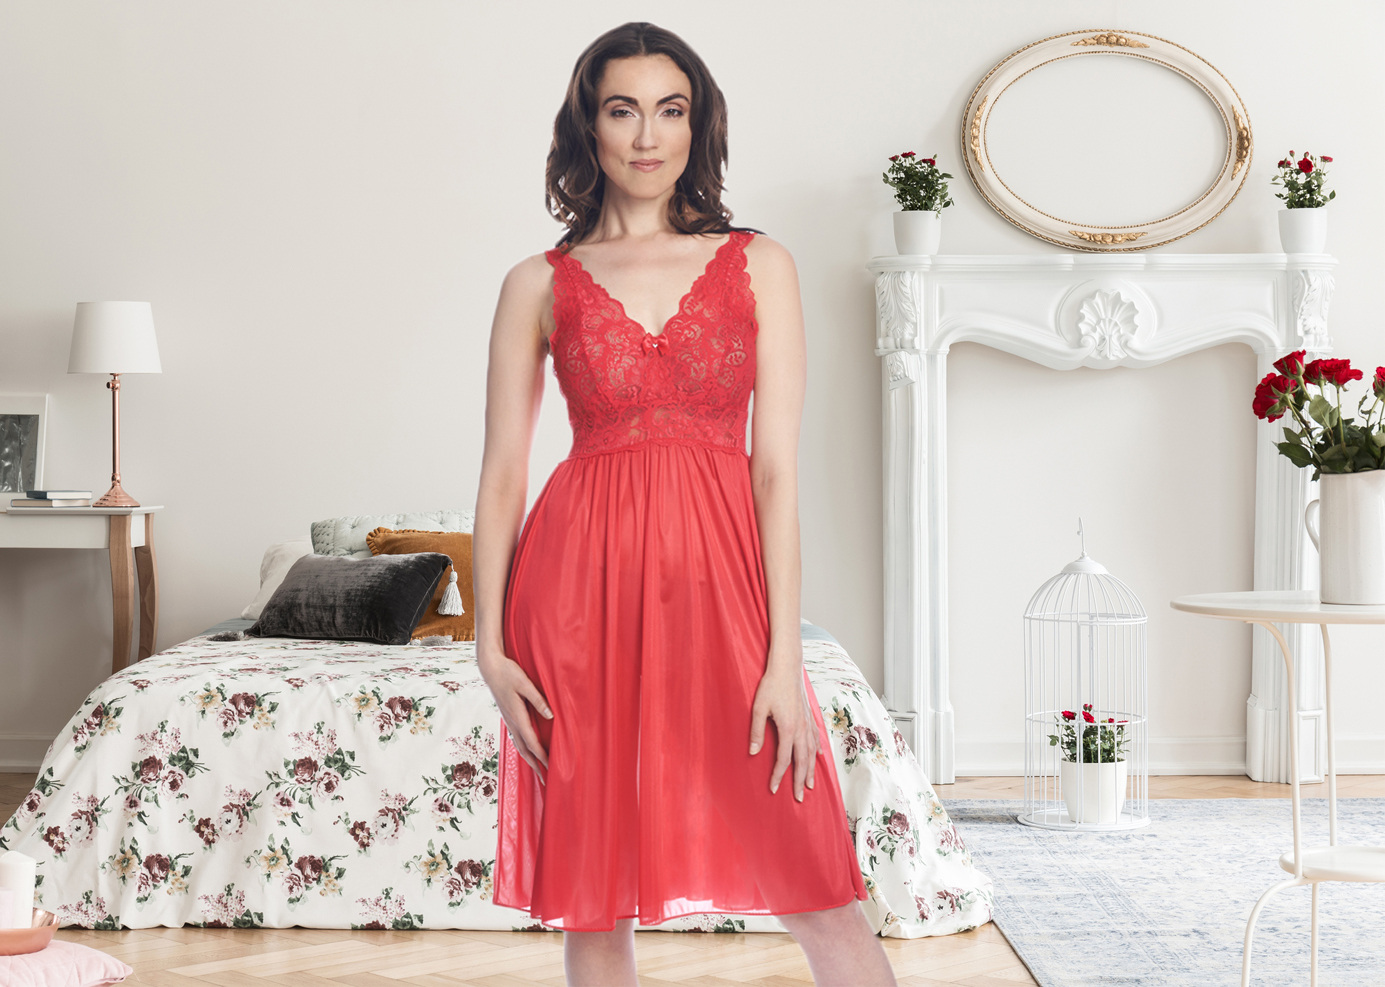 Shadowline Silhouette collection - sheer red nylon and lace nightdress